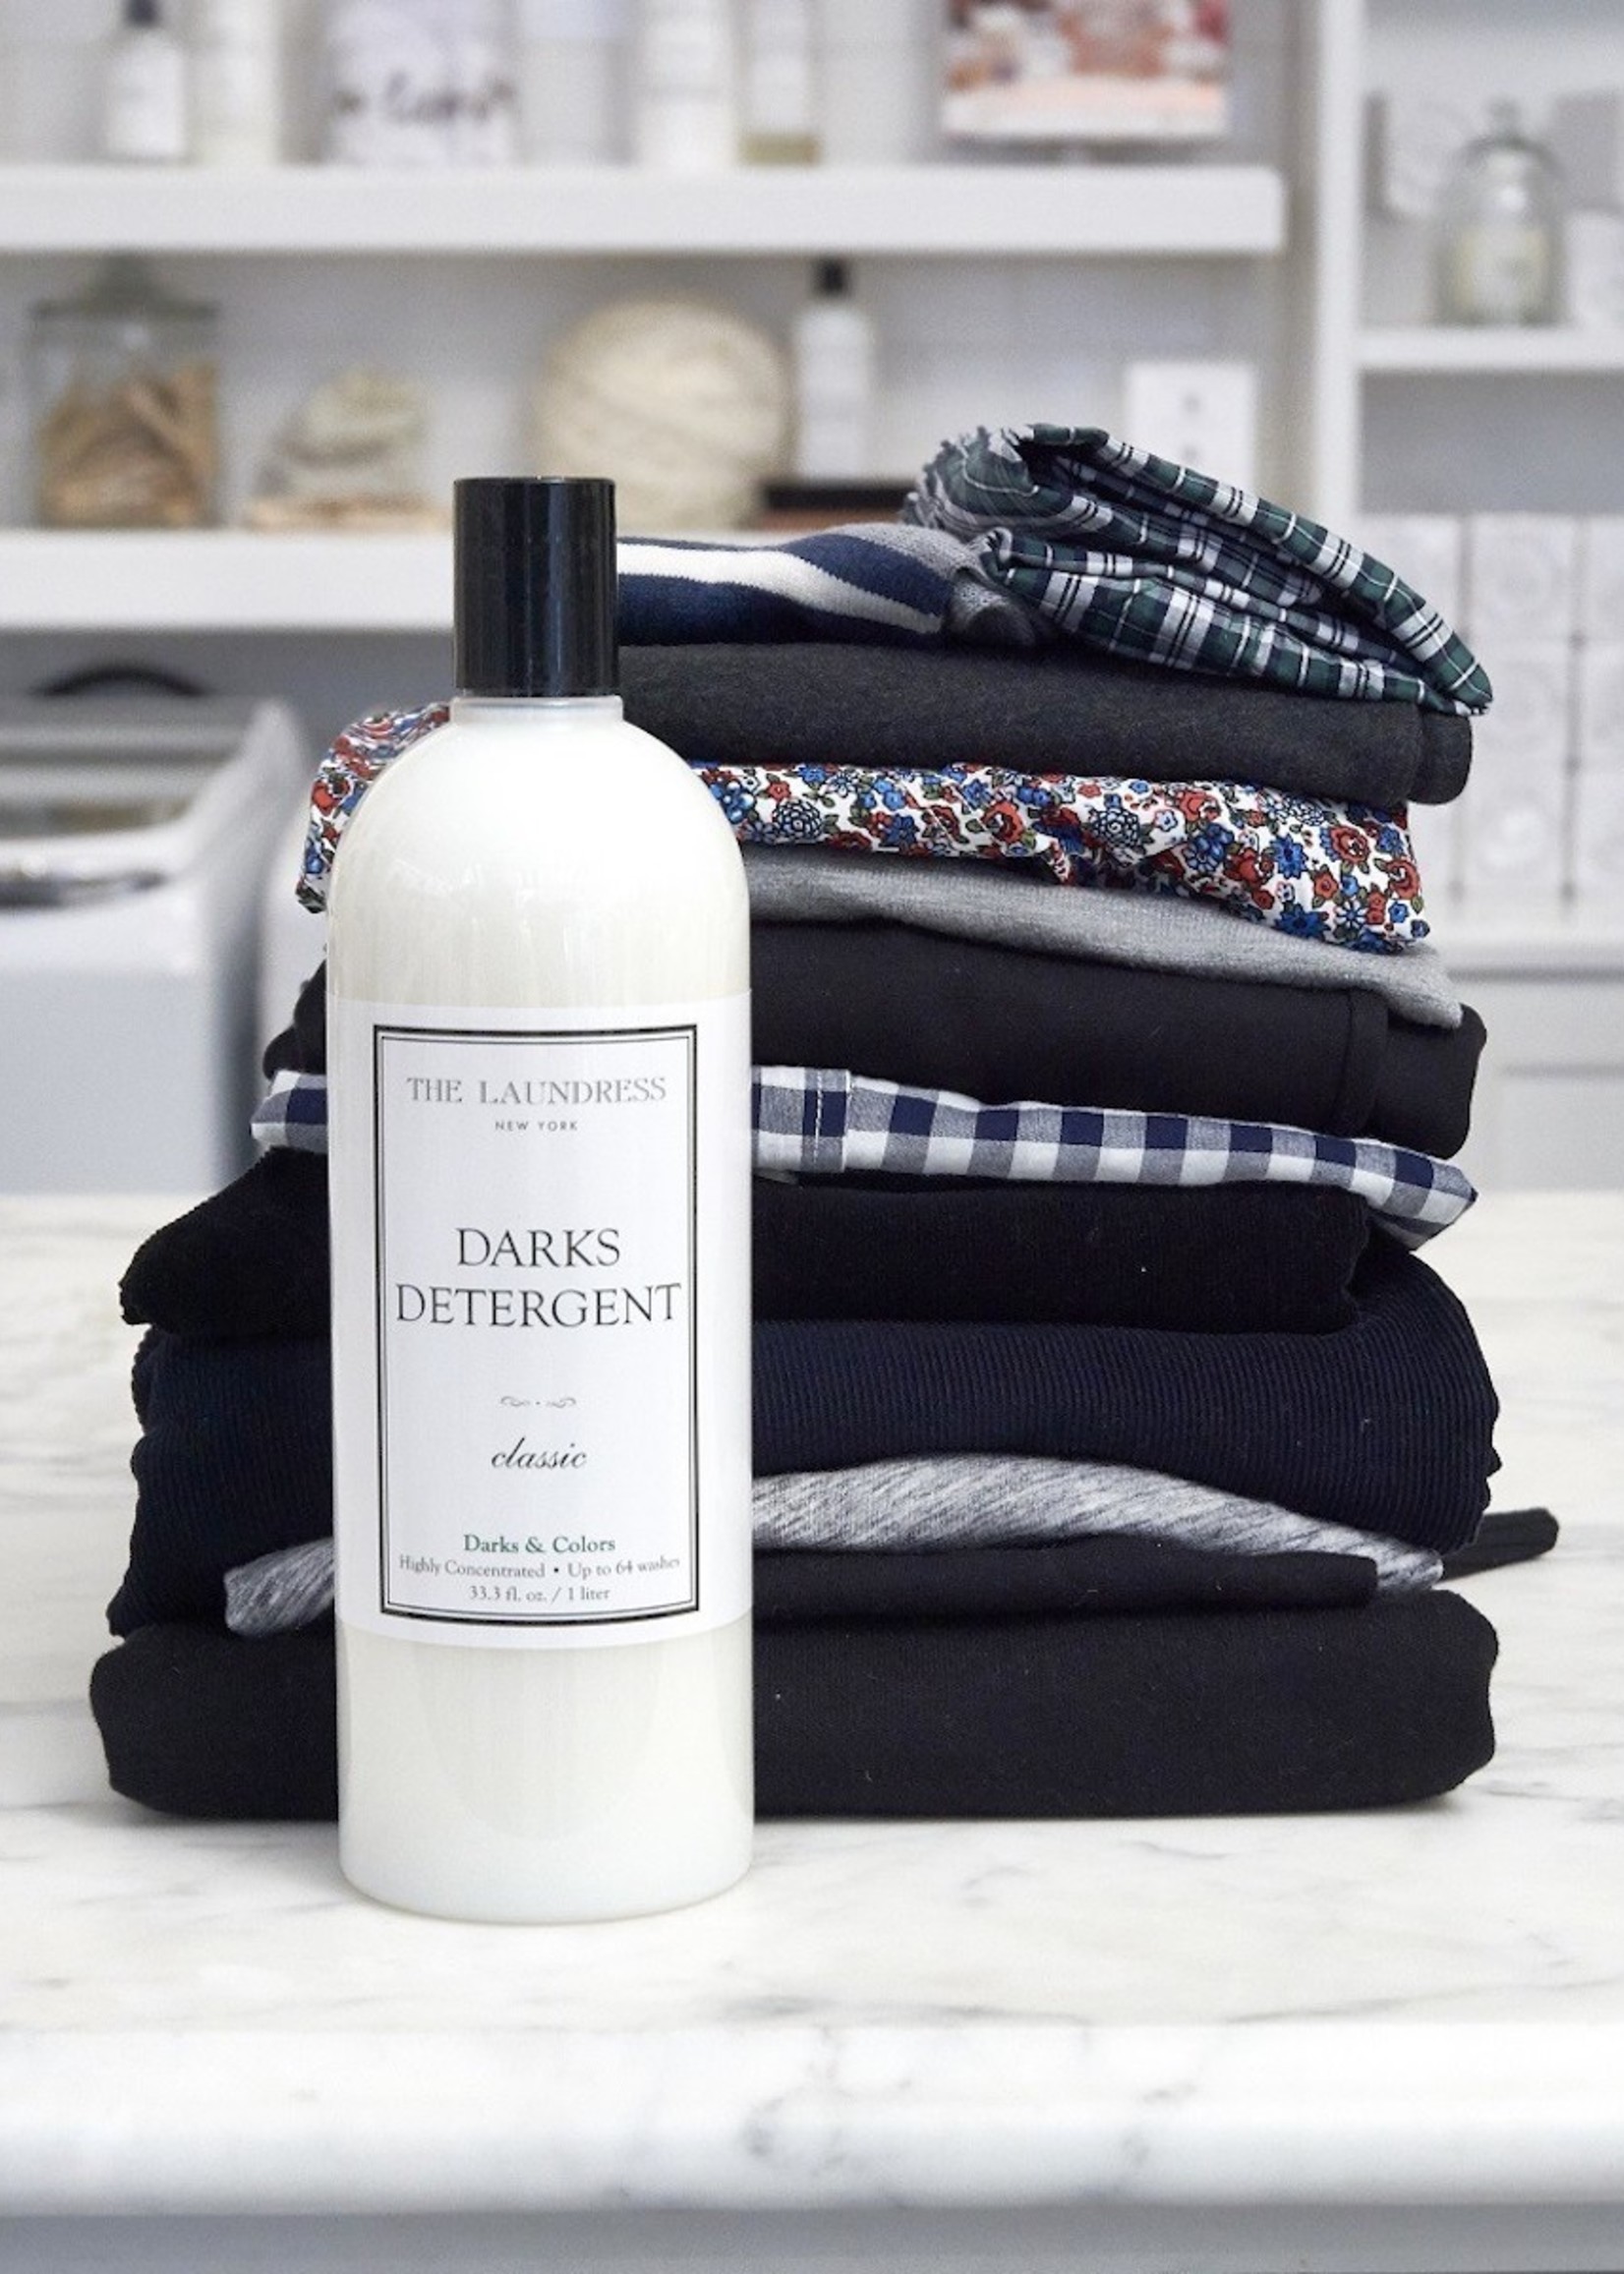 The Laundress New York The Laundress Darks Detergent (Classic) (32 oz)